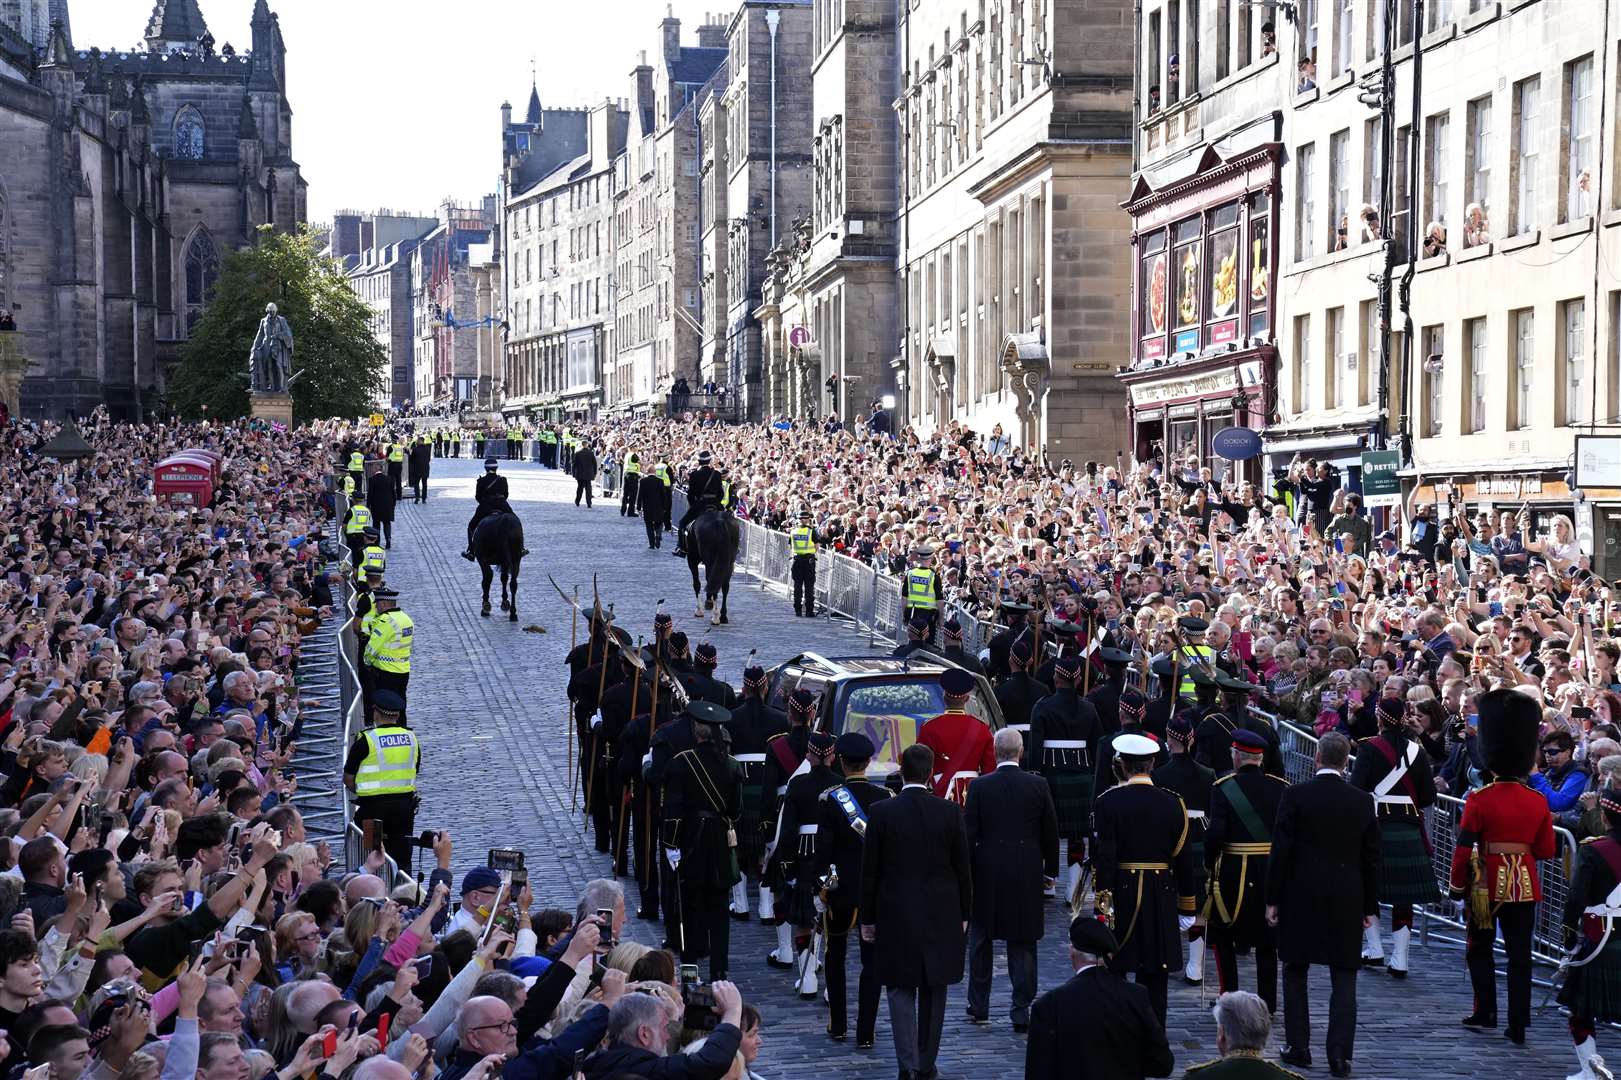 Sombre crowds lined the route as the hearse bearing the Queen’s coffin, followed by members of the royal family on foot, made its way up the Royal Mile, Edinburgh, in September (Jon Super/PA)